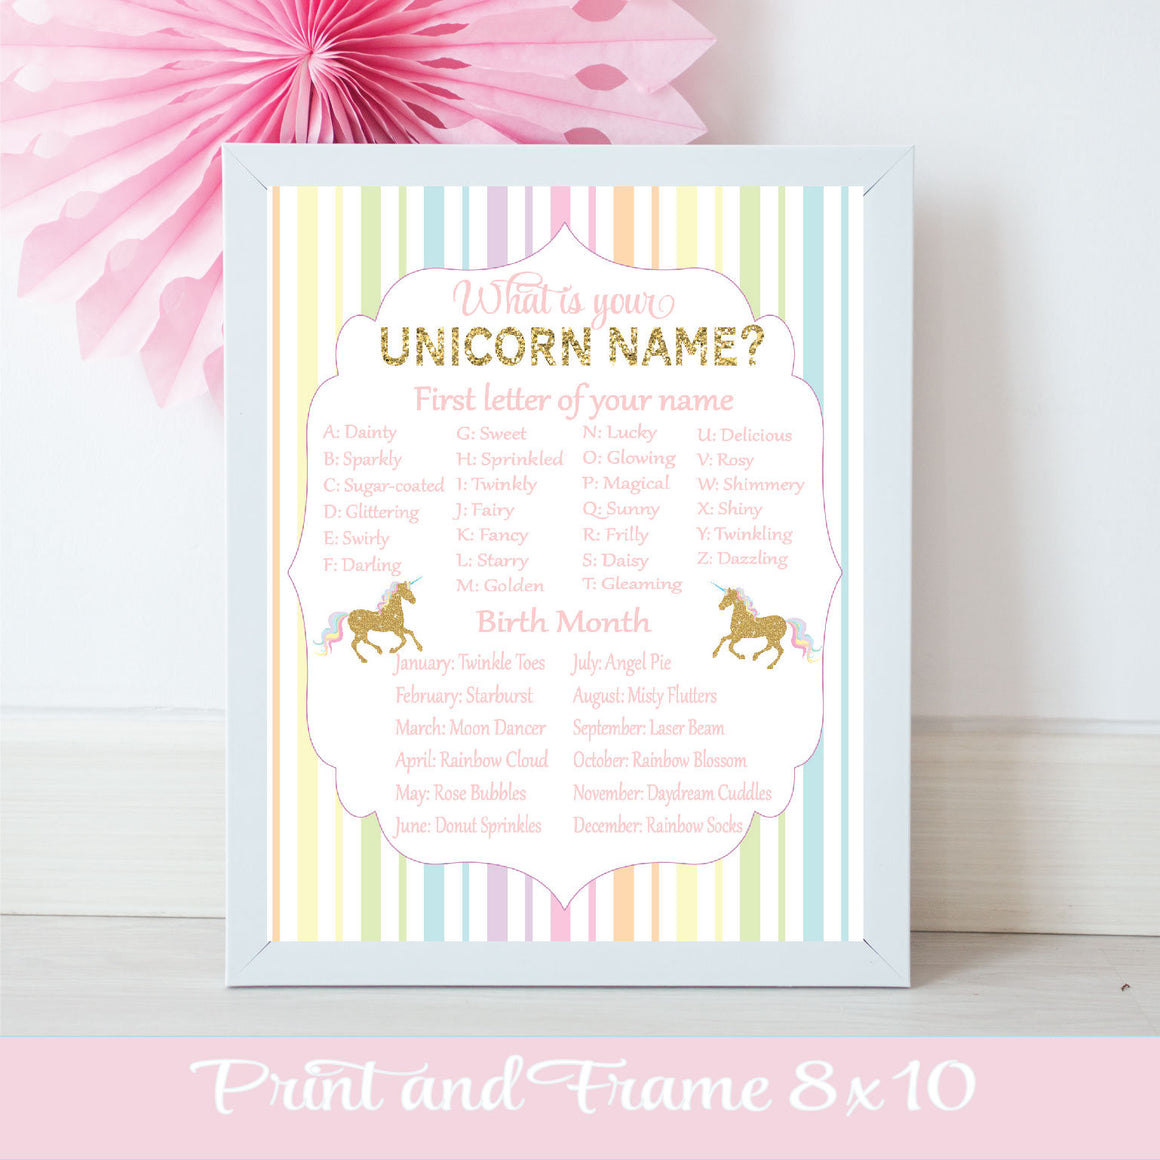 Unicorn Name chart with letters and birth months to discover your unique Unicorn name for birthday party